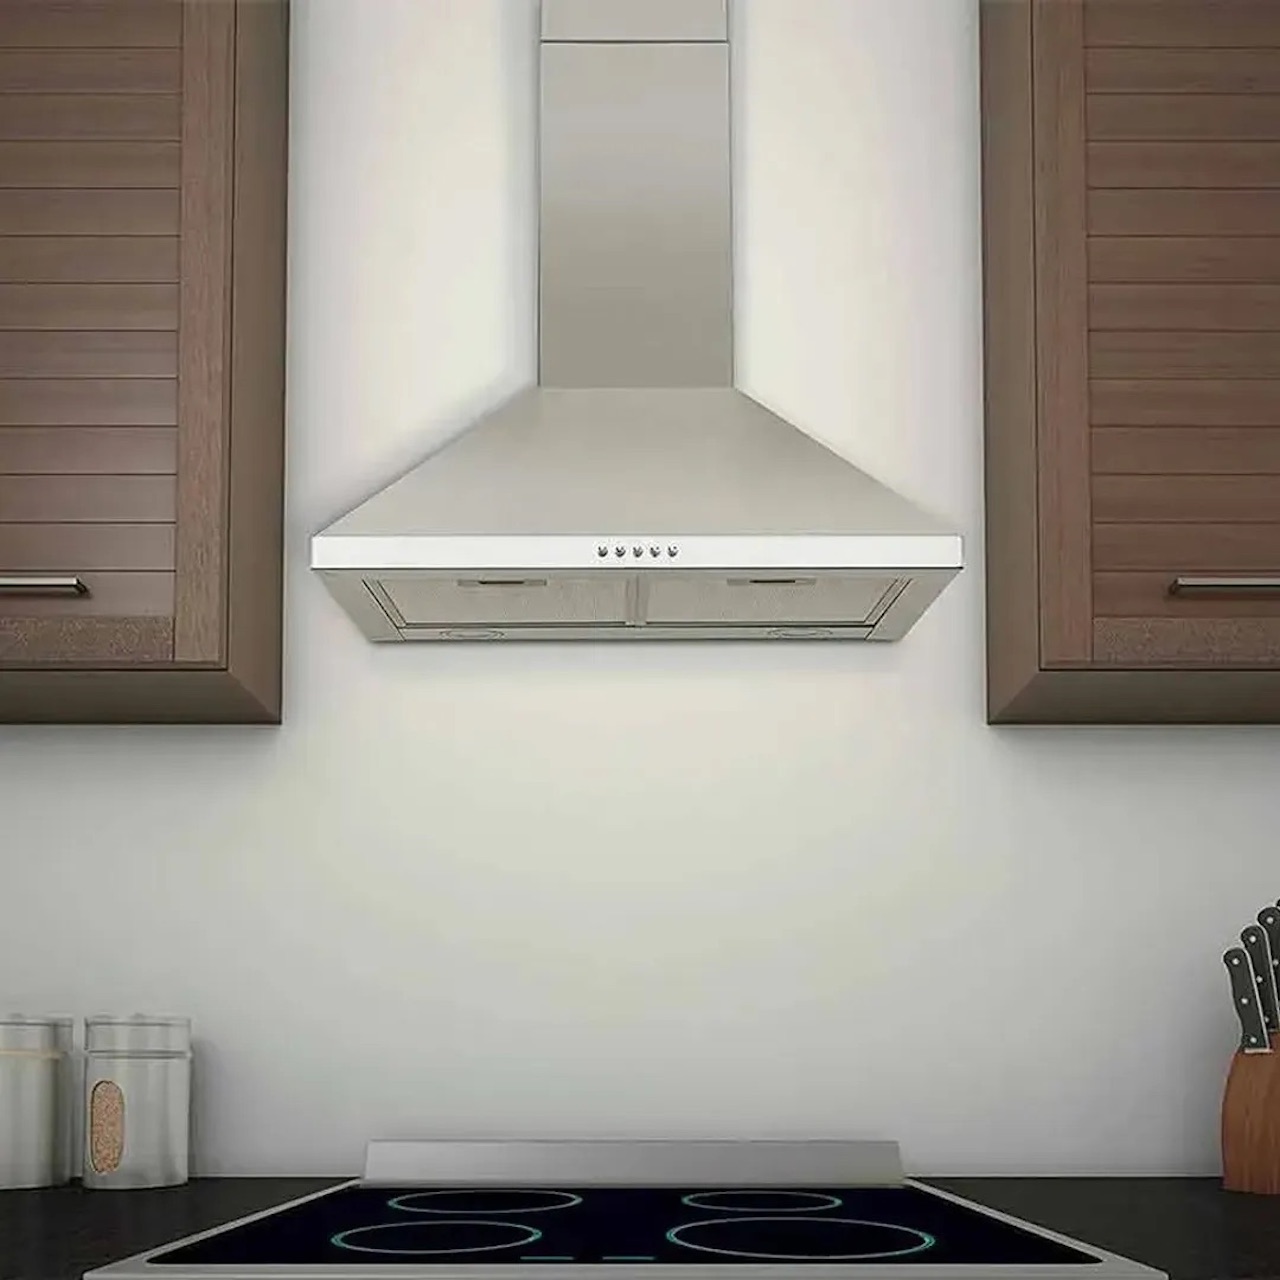 How To Vent Range Hood On Interior Wall